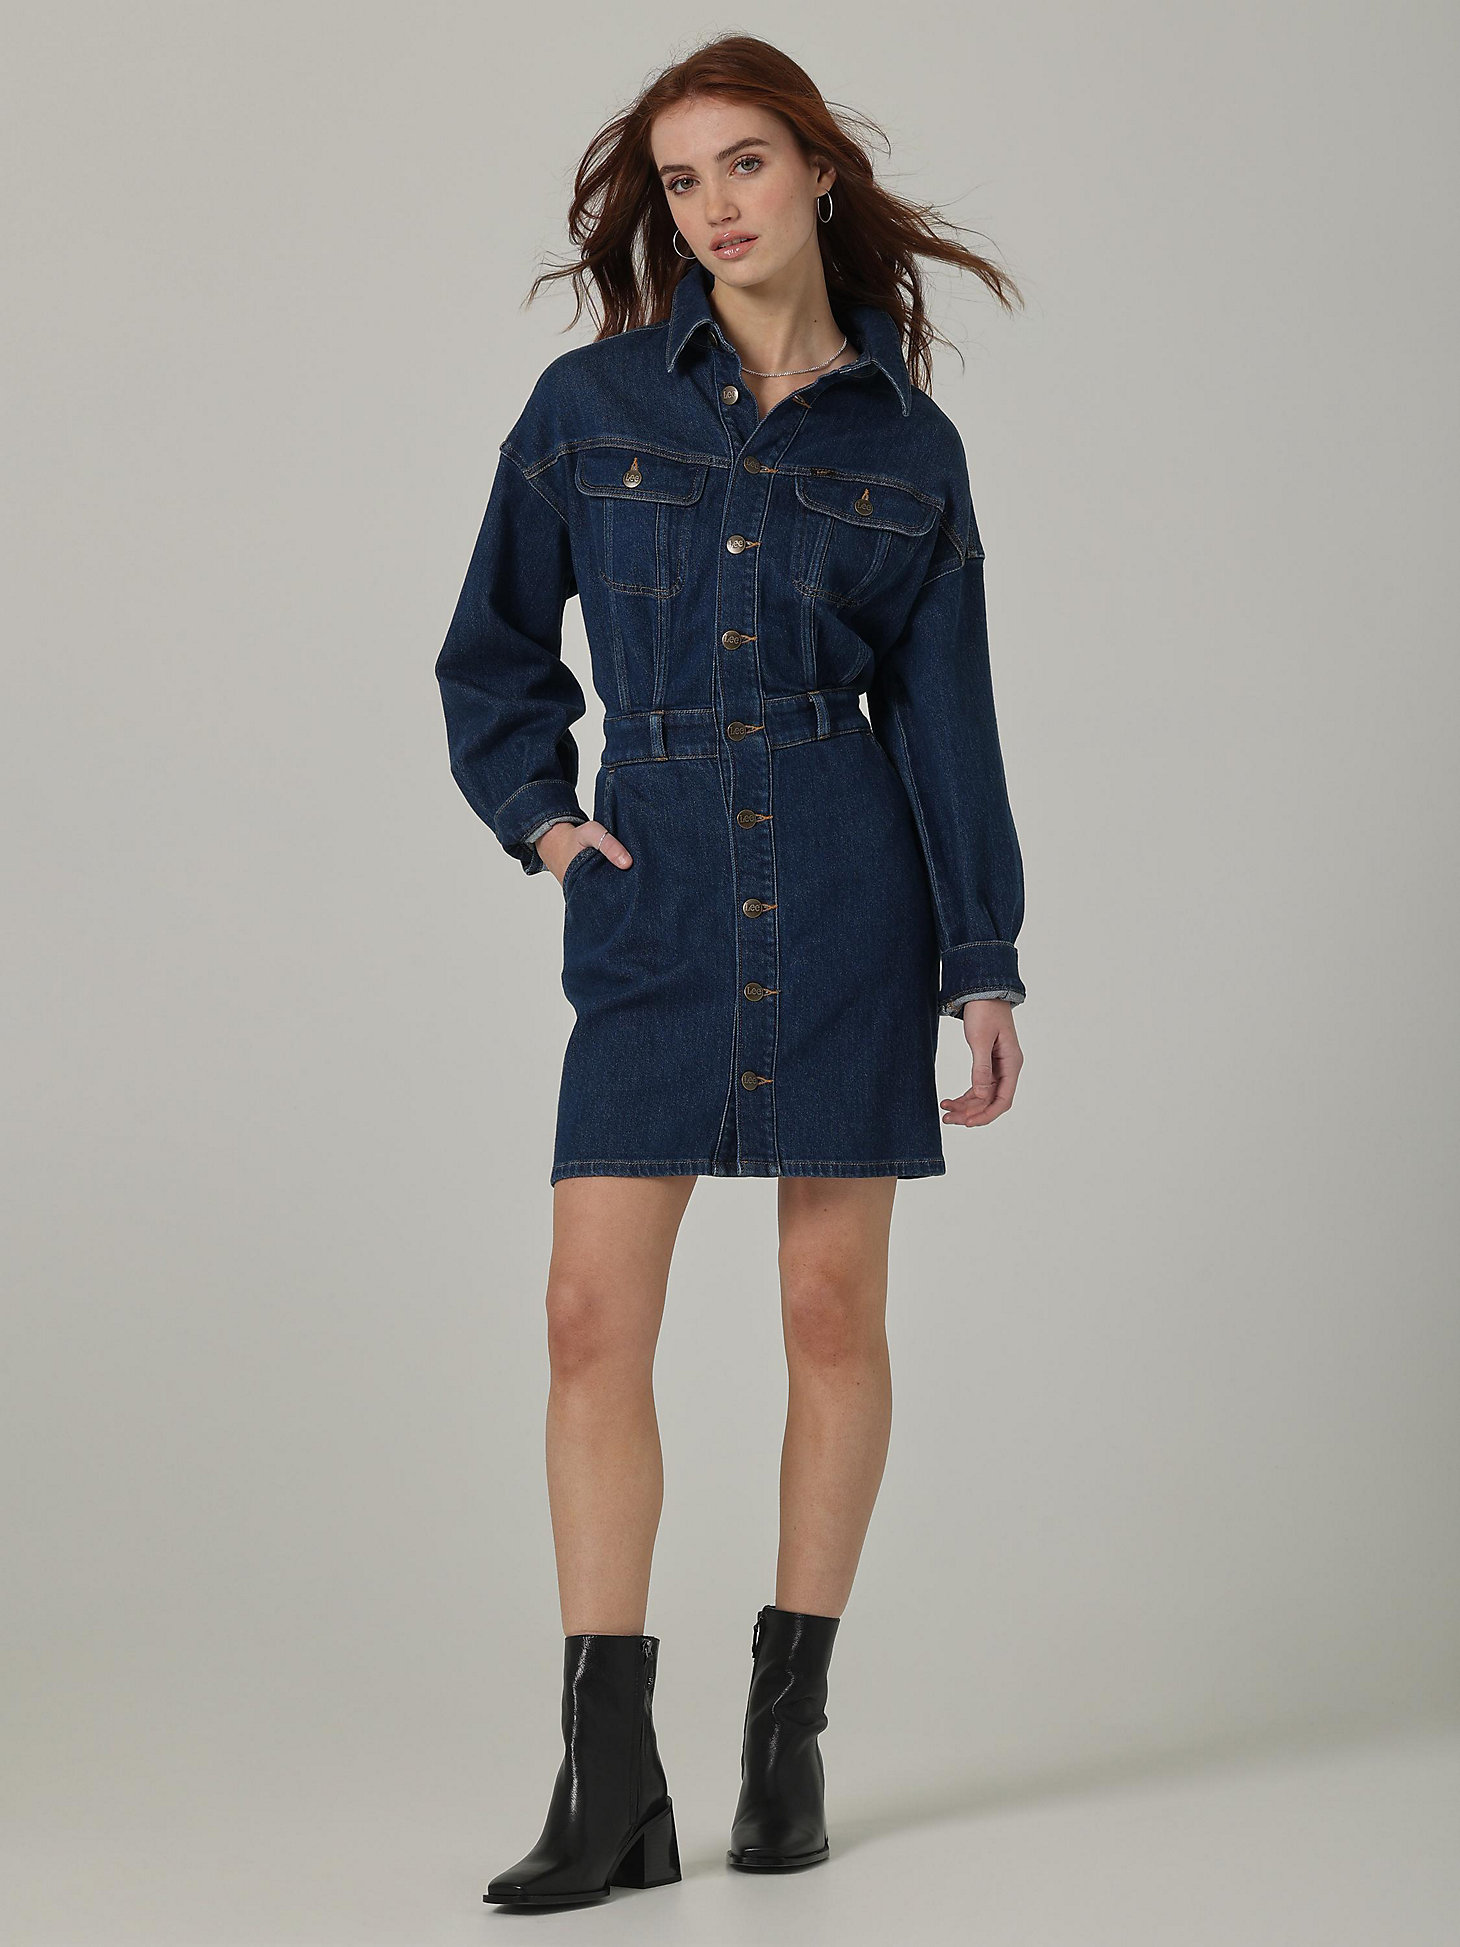 Women's Lee European Collection Dropped Shoulder Button Down Dress in Greater Blue alternative view 5